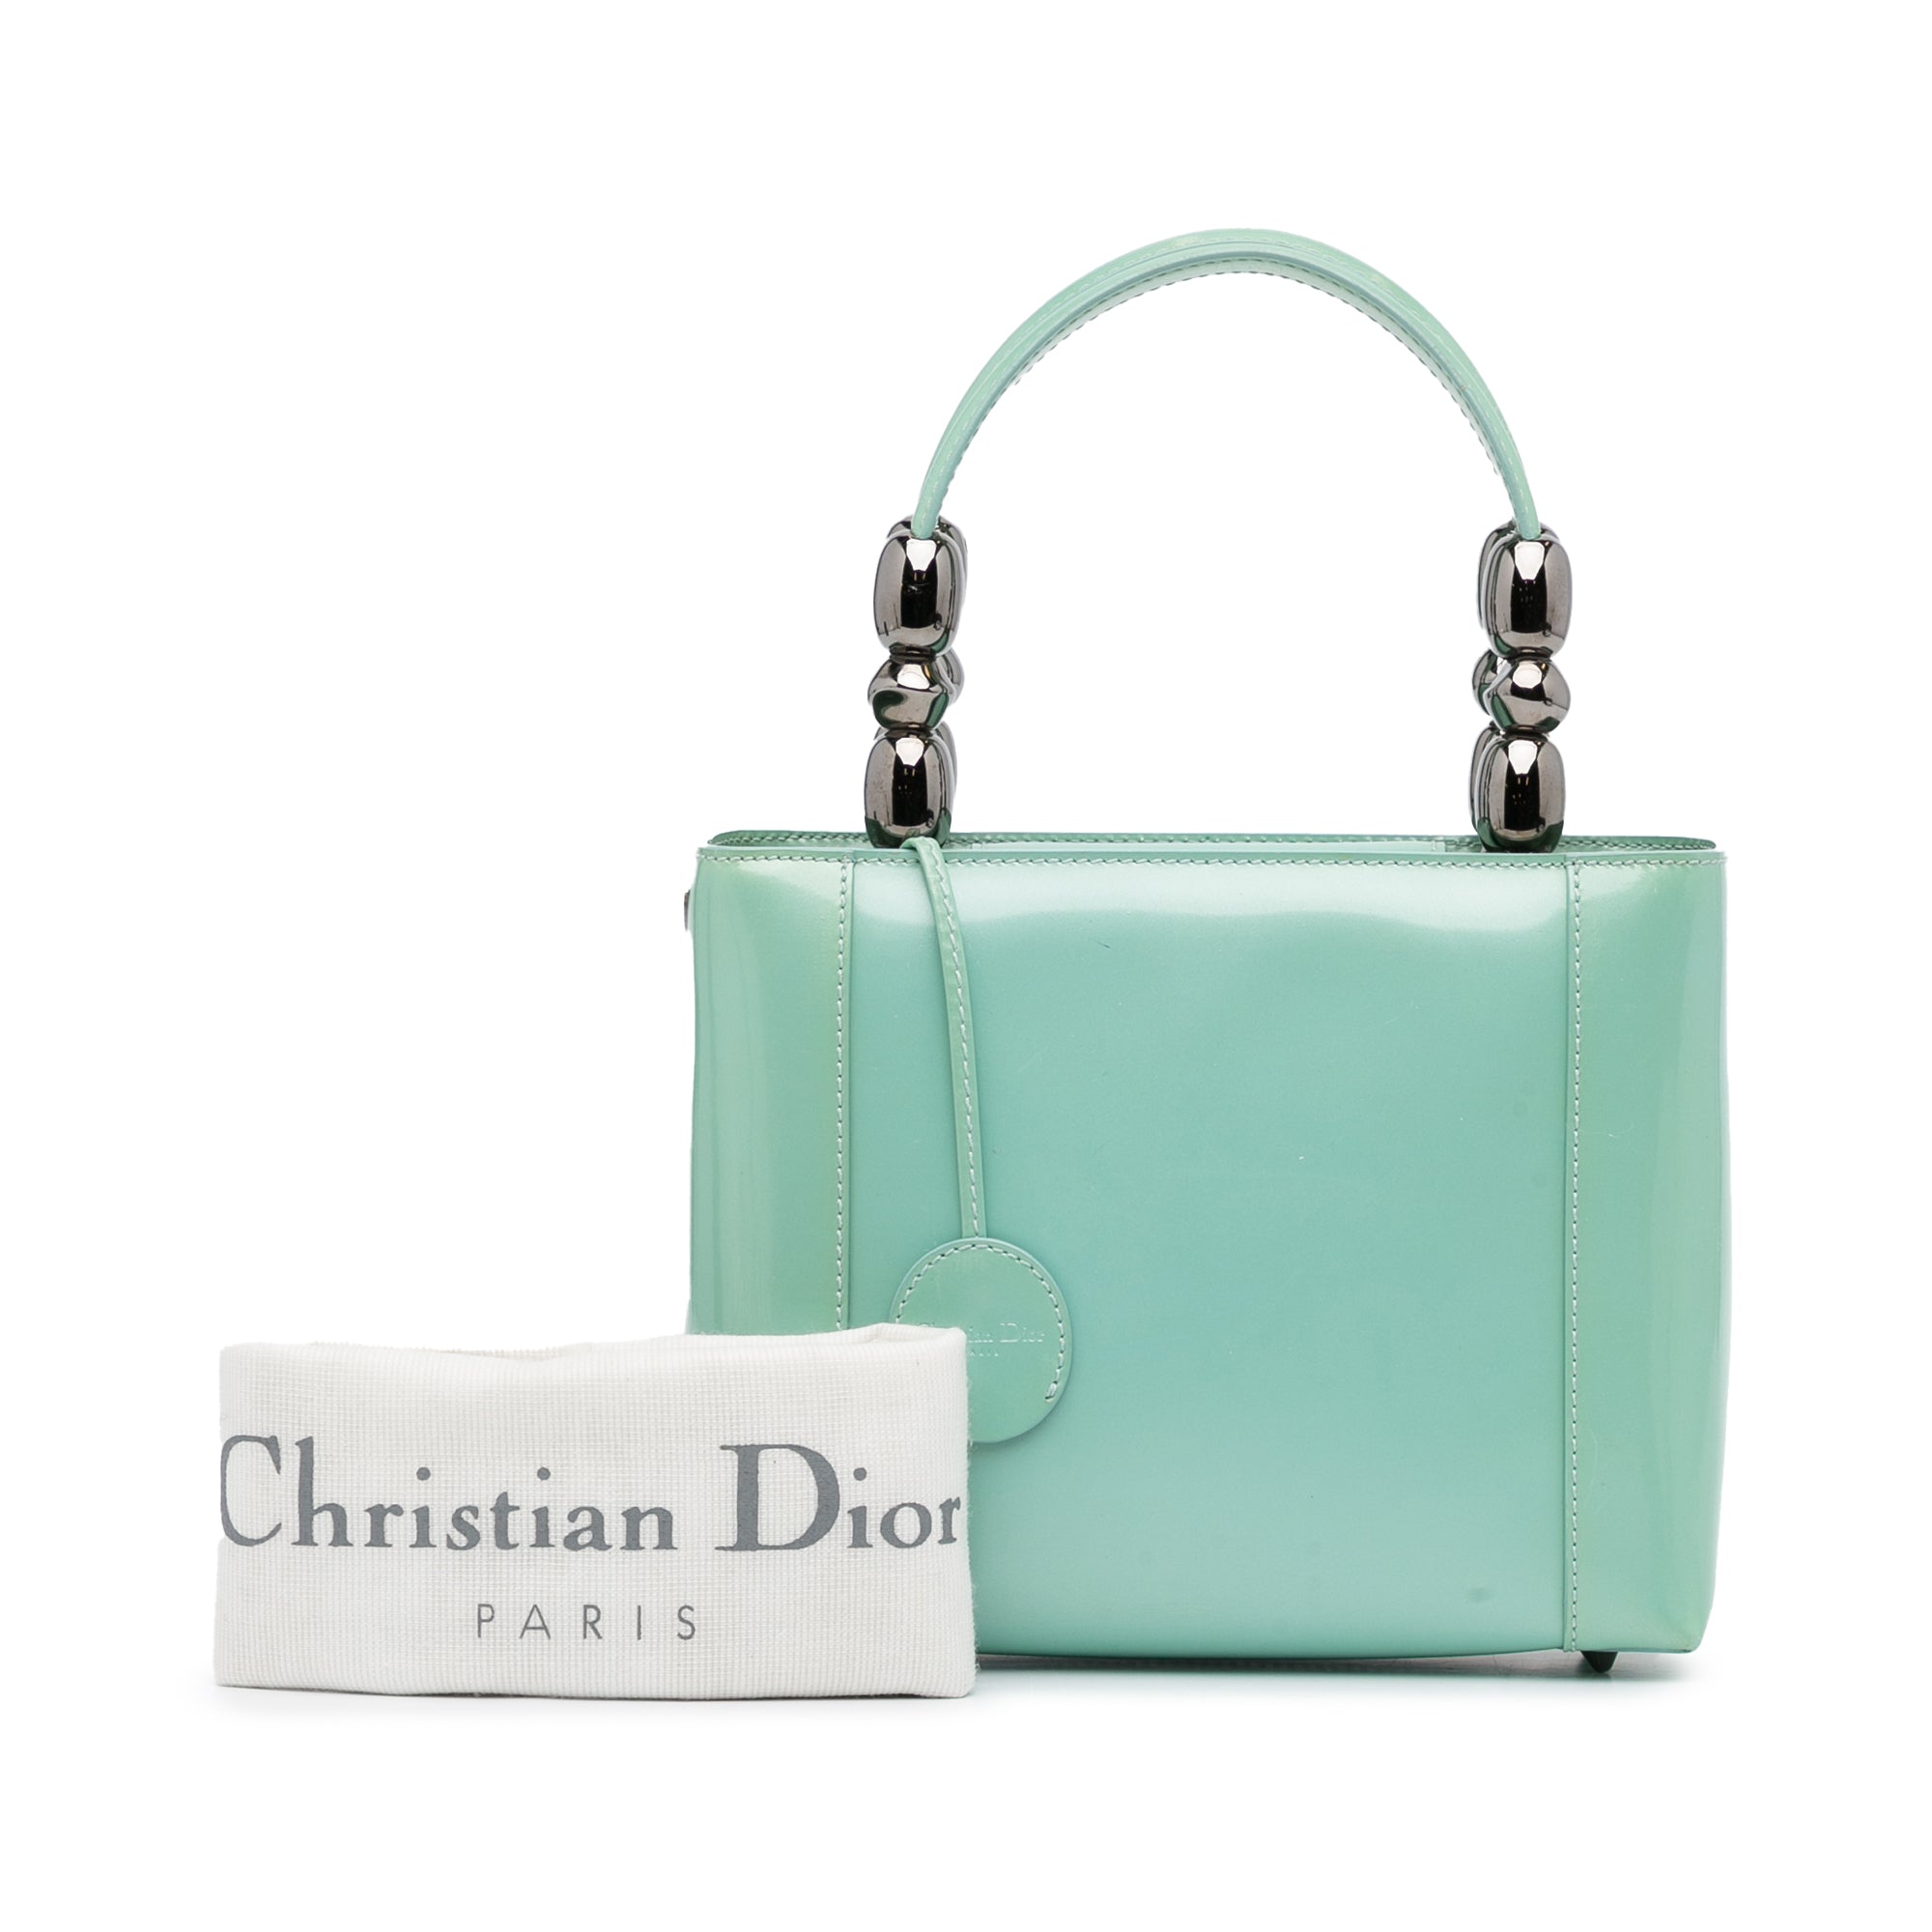 Custom Replacement Straps & Handles for Christian Dior Purses